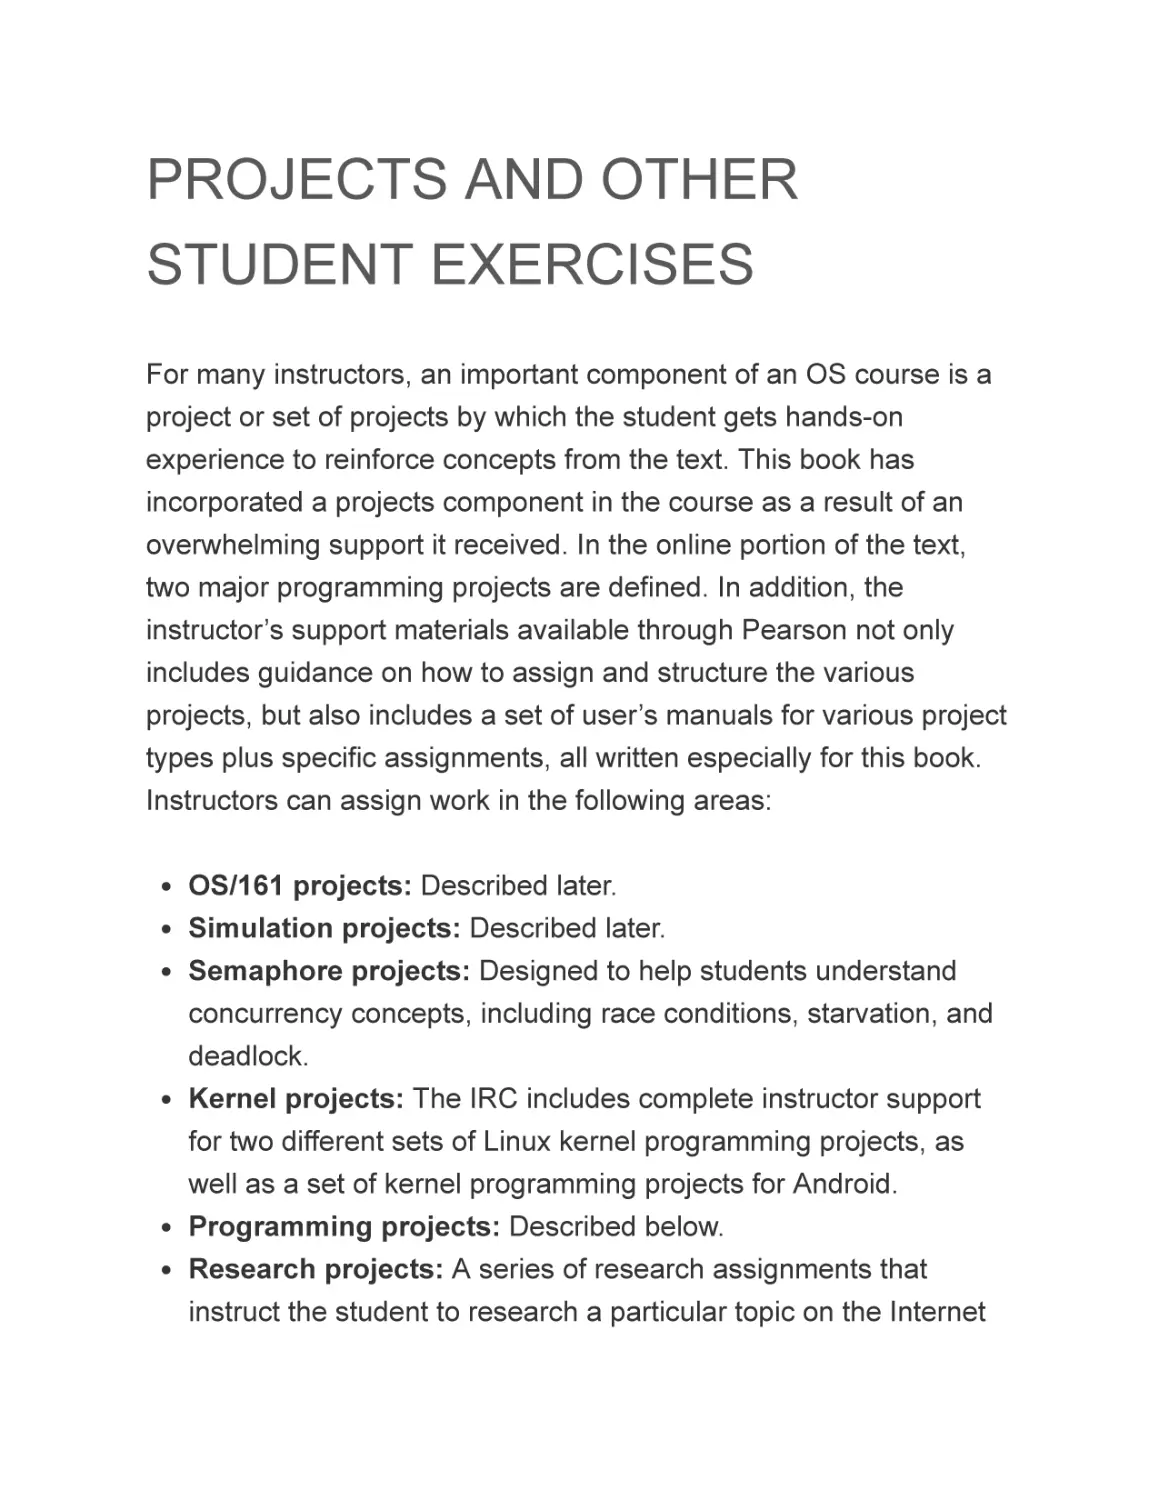 PROJECTS AND OTHER STUDENT EXERCISES